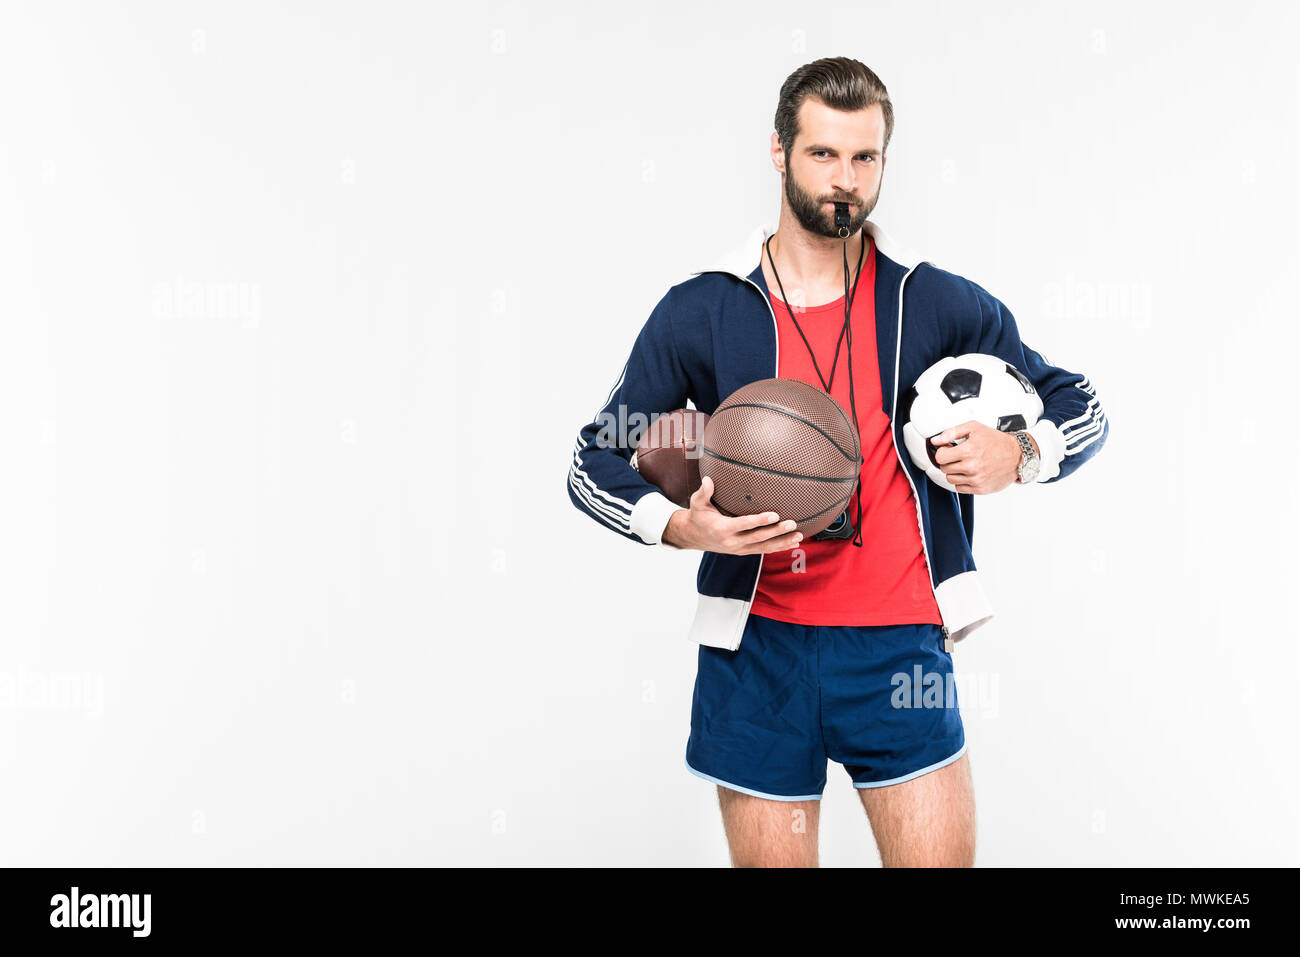 Coach Sportif avec sifflet holding rugby, basket-ball et football, isolated  on white Photo Stock - Alamy